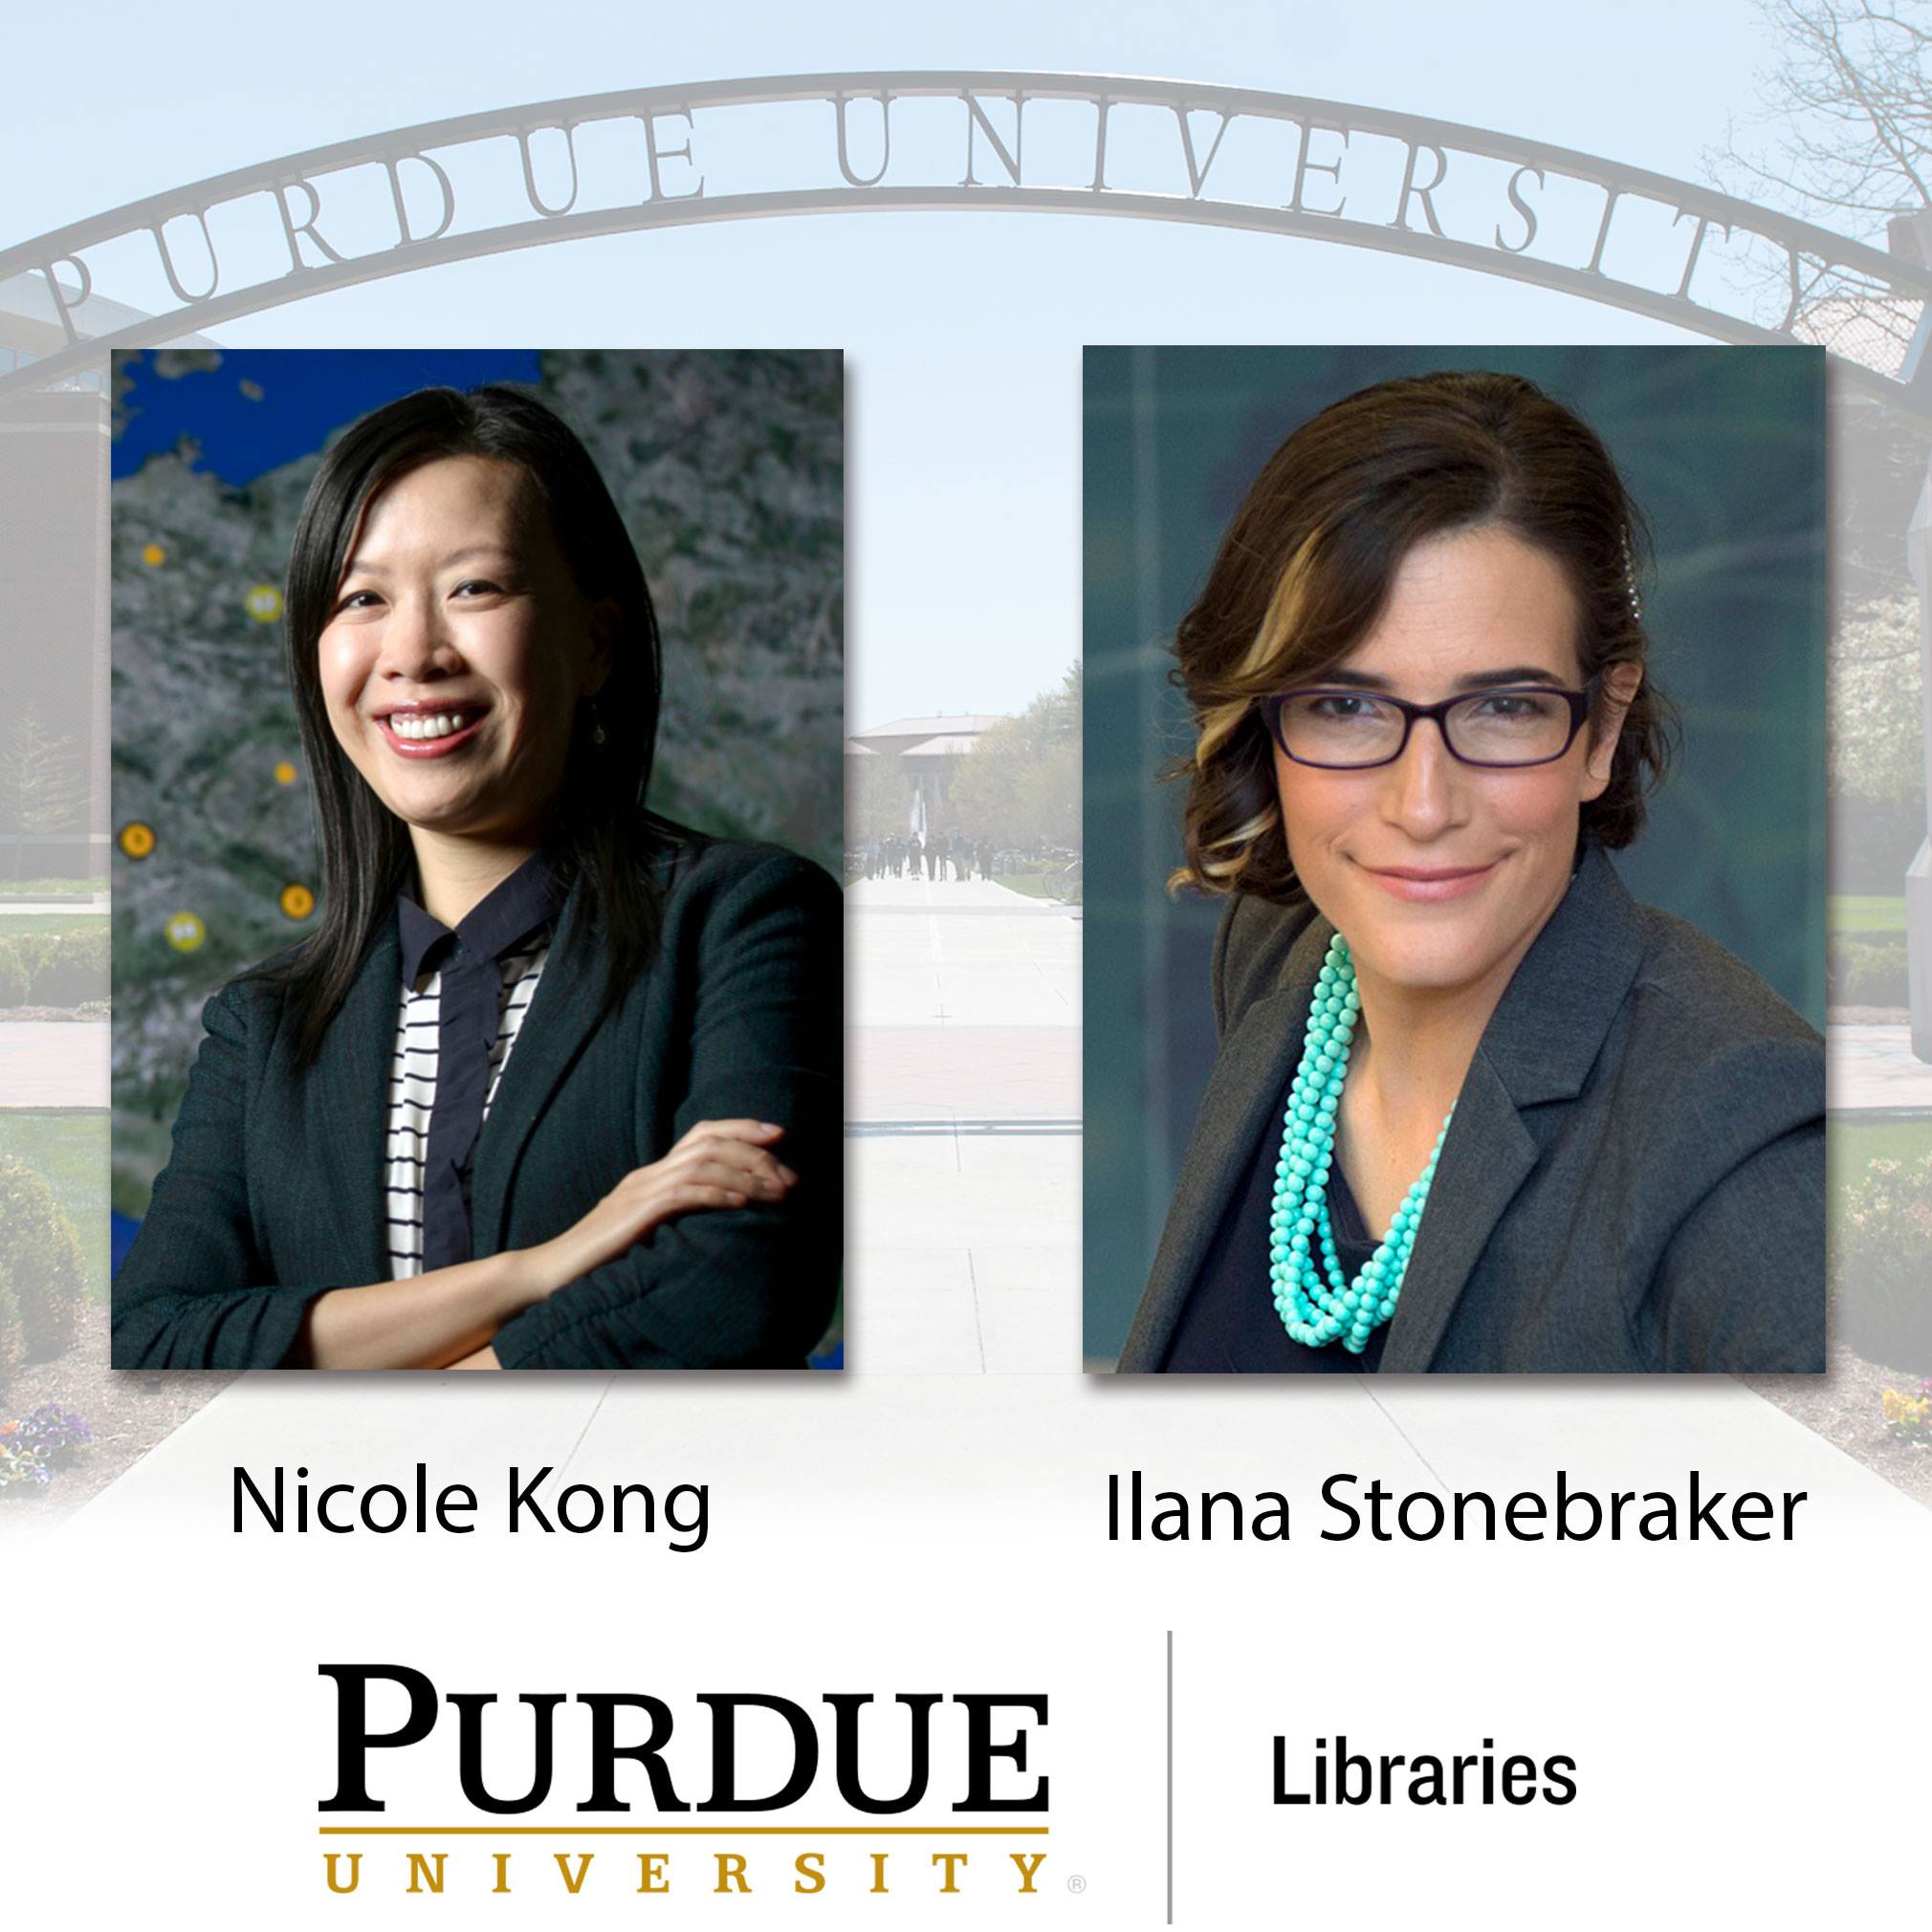 Libraies faculty members Nicole Kong and Ilana Stonebraker were both approved for promotion to associate professor with tenure.